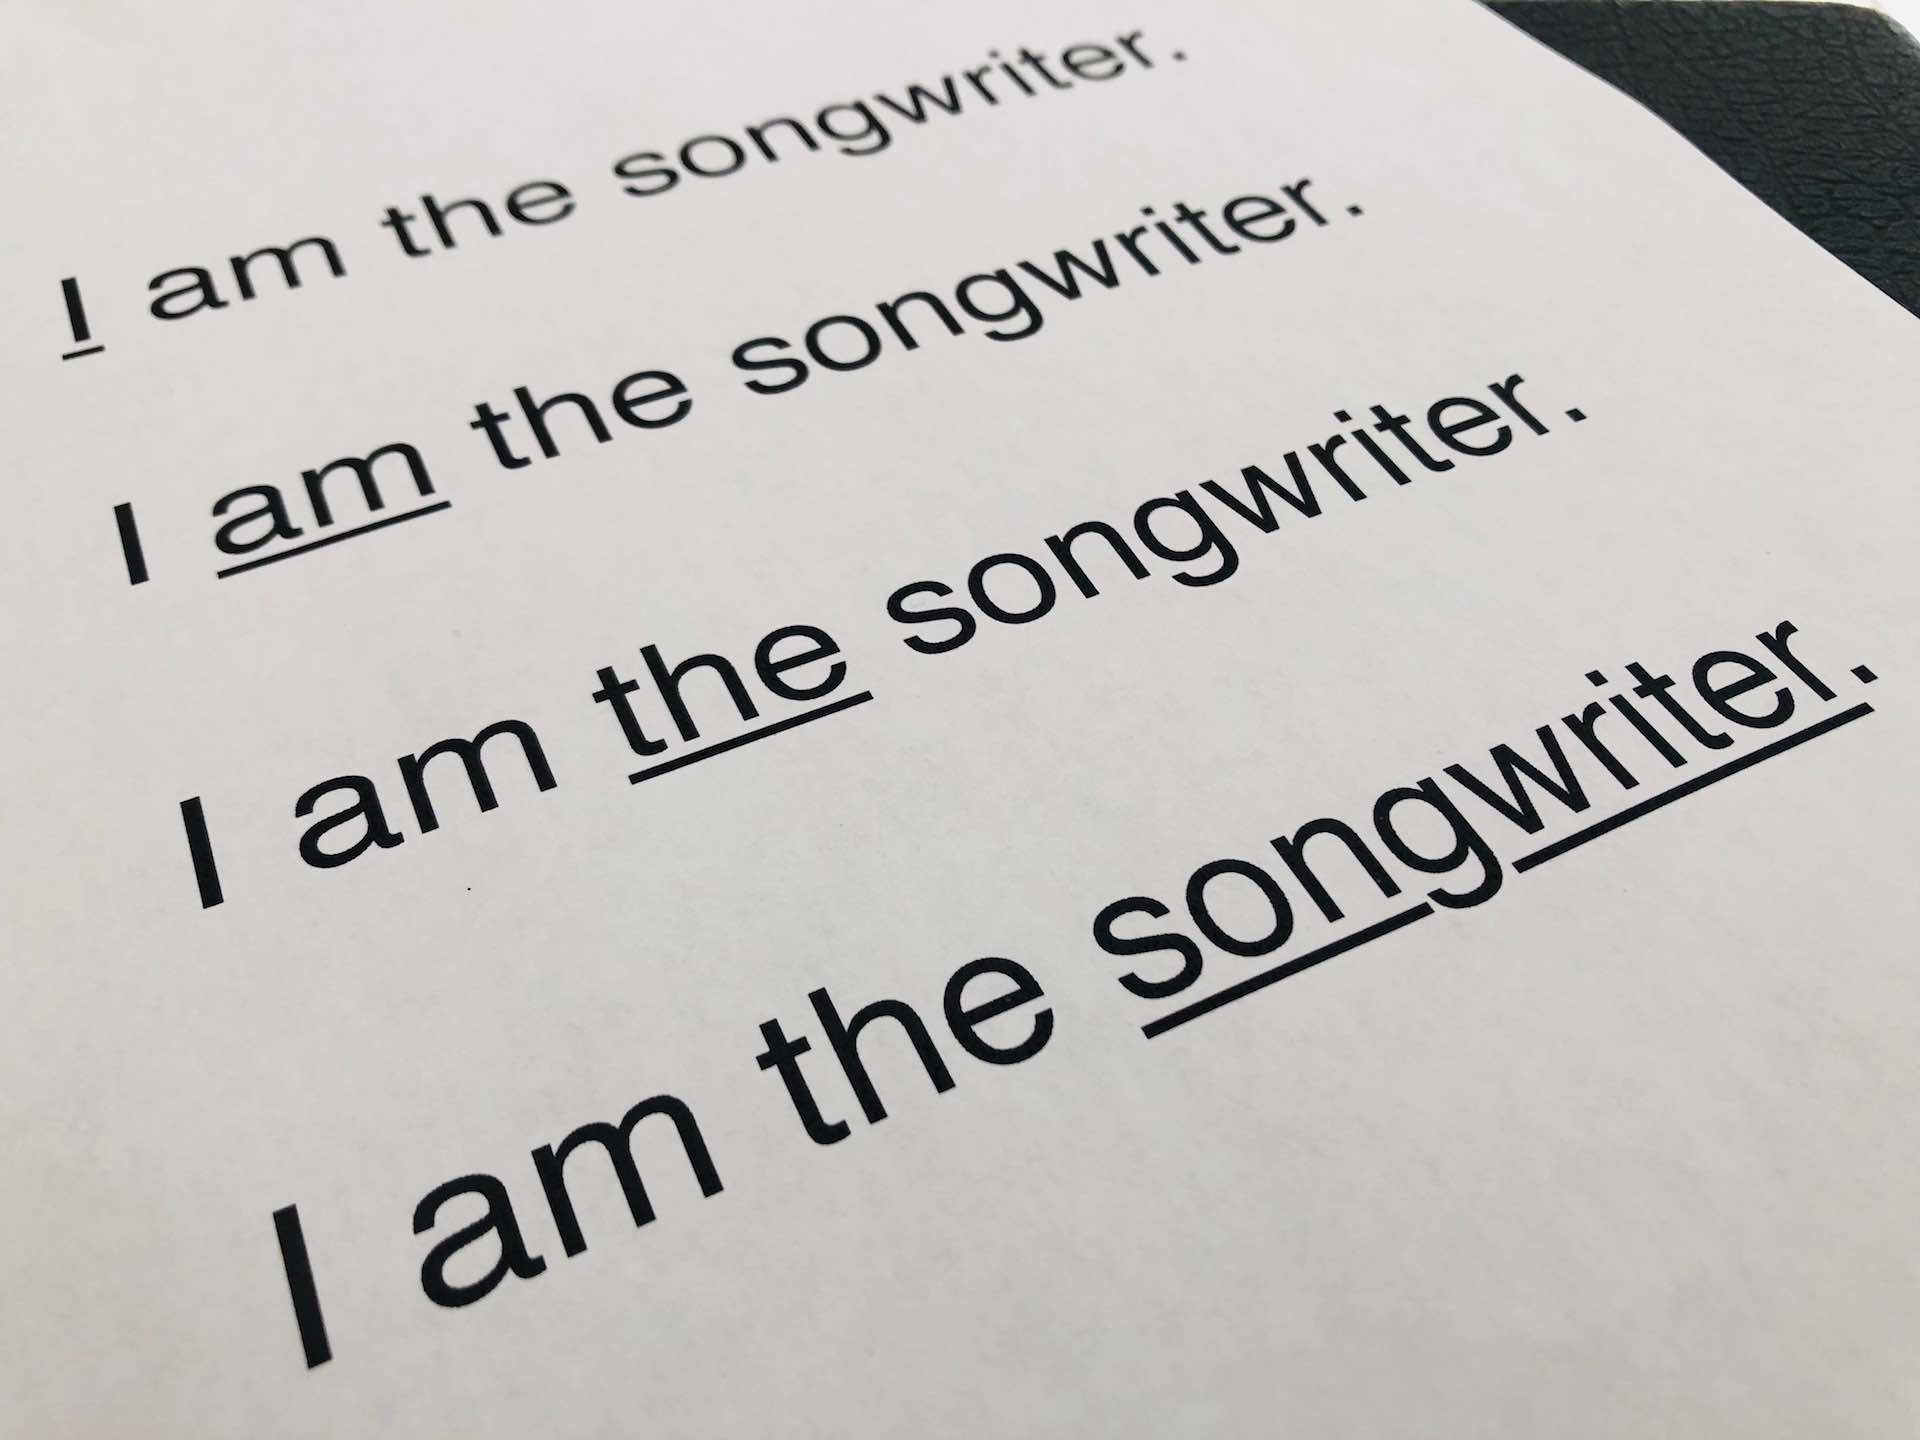 How to write a song - Thinking Activity - IncredibleThoughts.Co